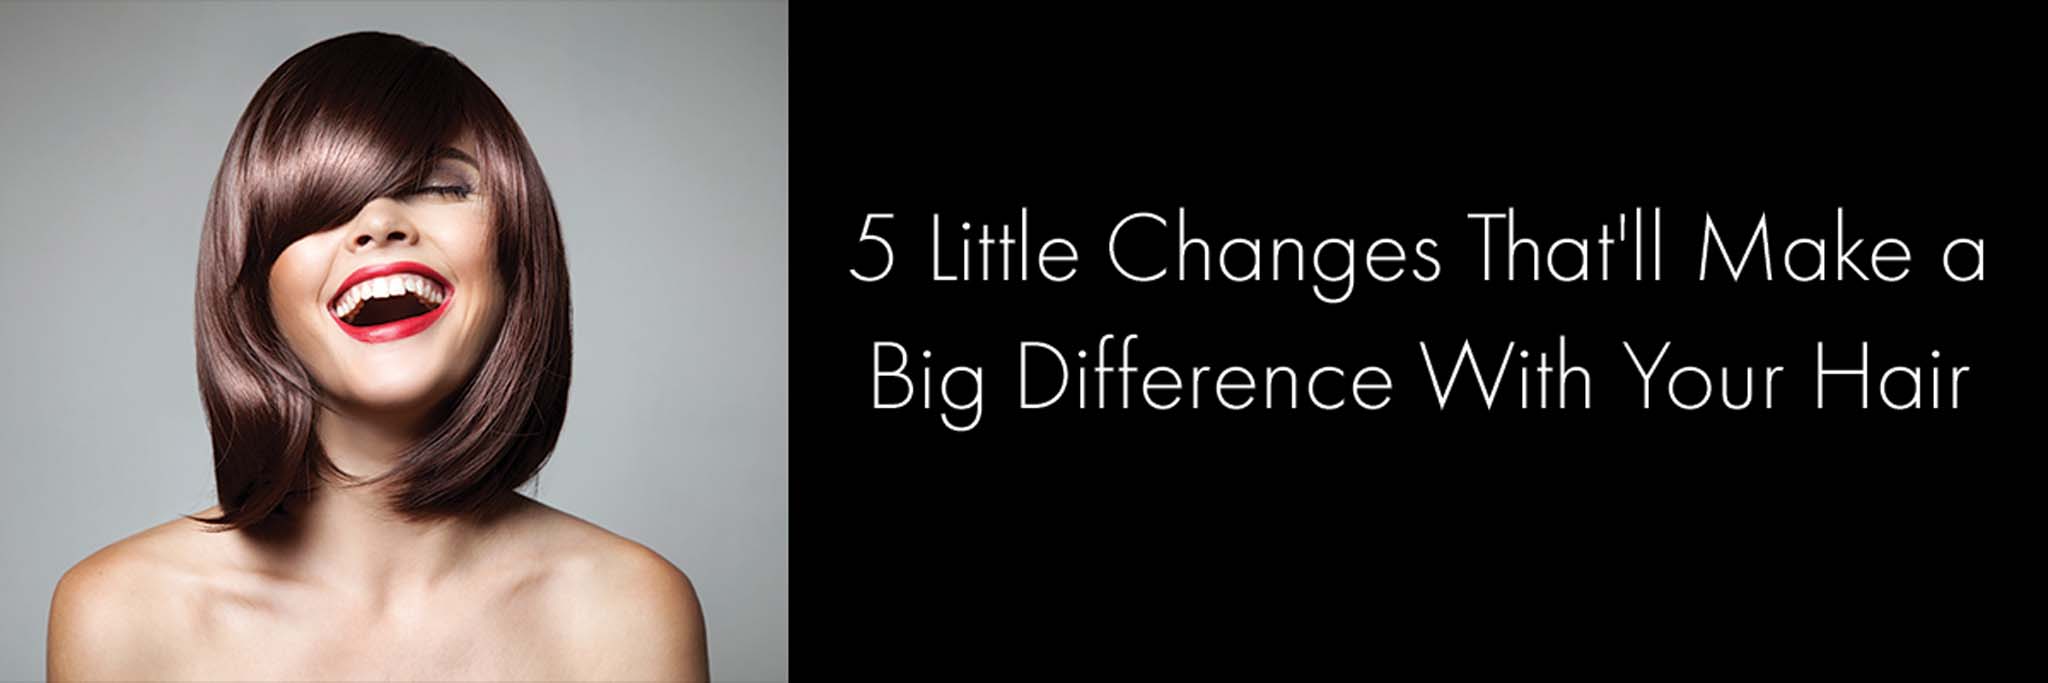 5 little changes thatll make a big difference for hair